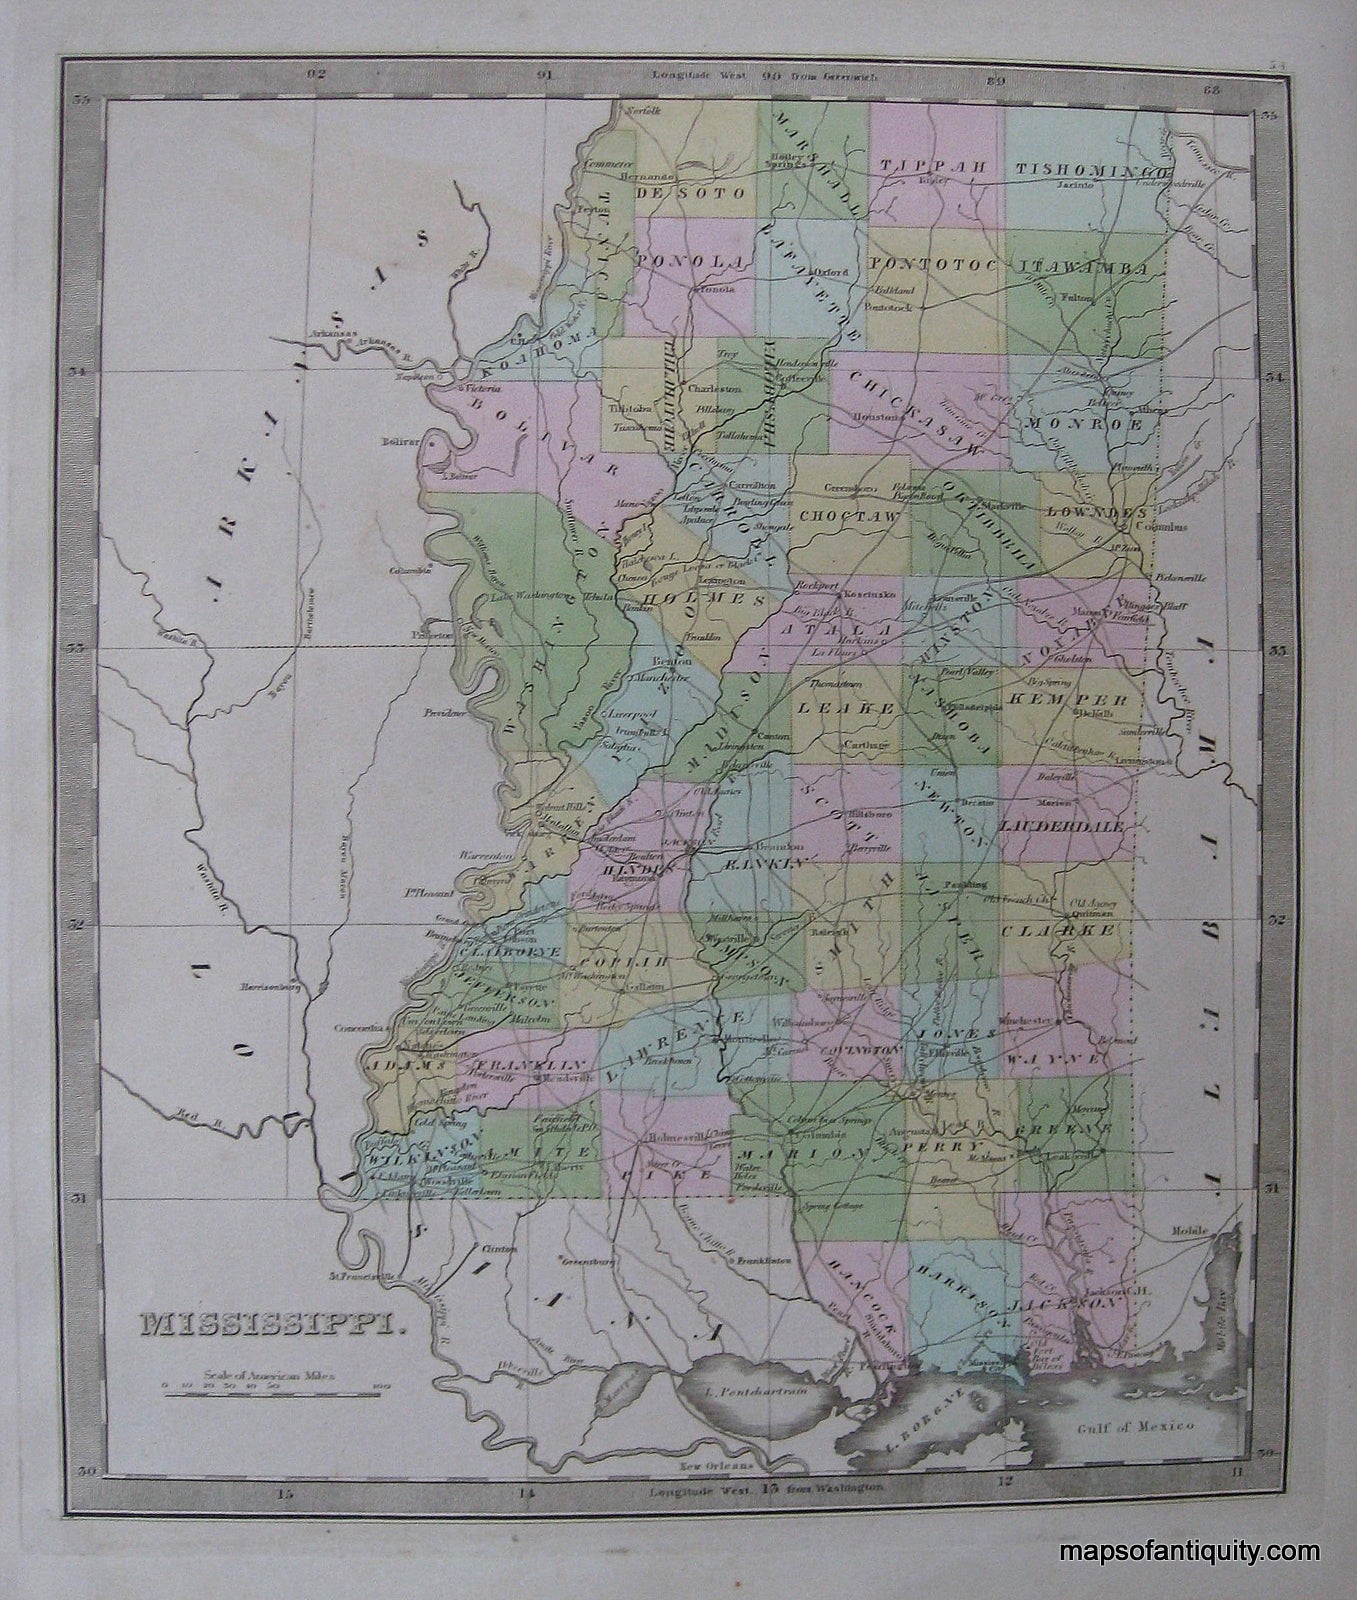 Antique-Hand-Colored-Map-Mississippi.-United-States-South-1848-Jeremiah-Greenleaf-Maps-Of-Antiquity